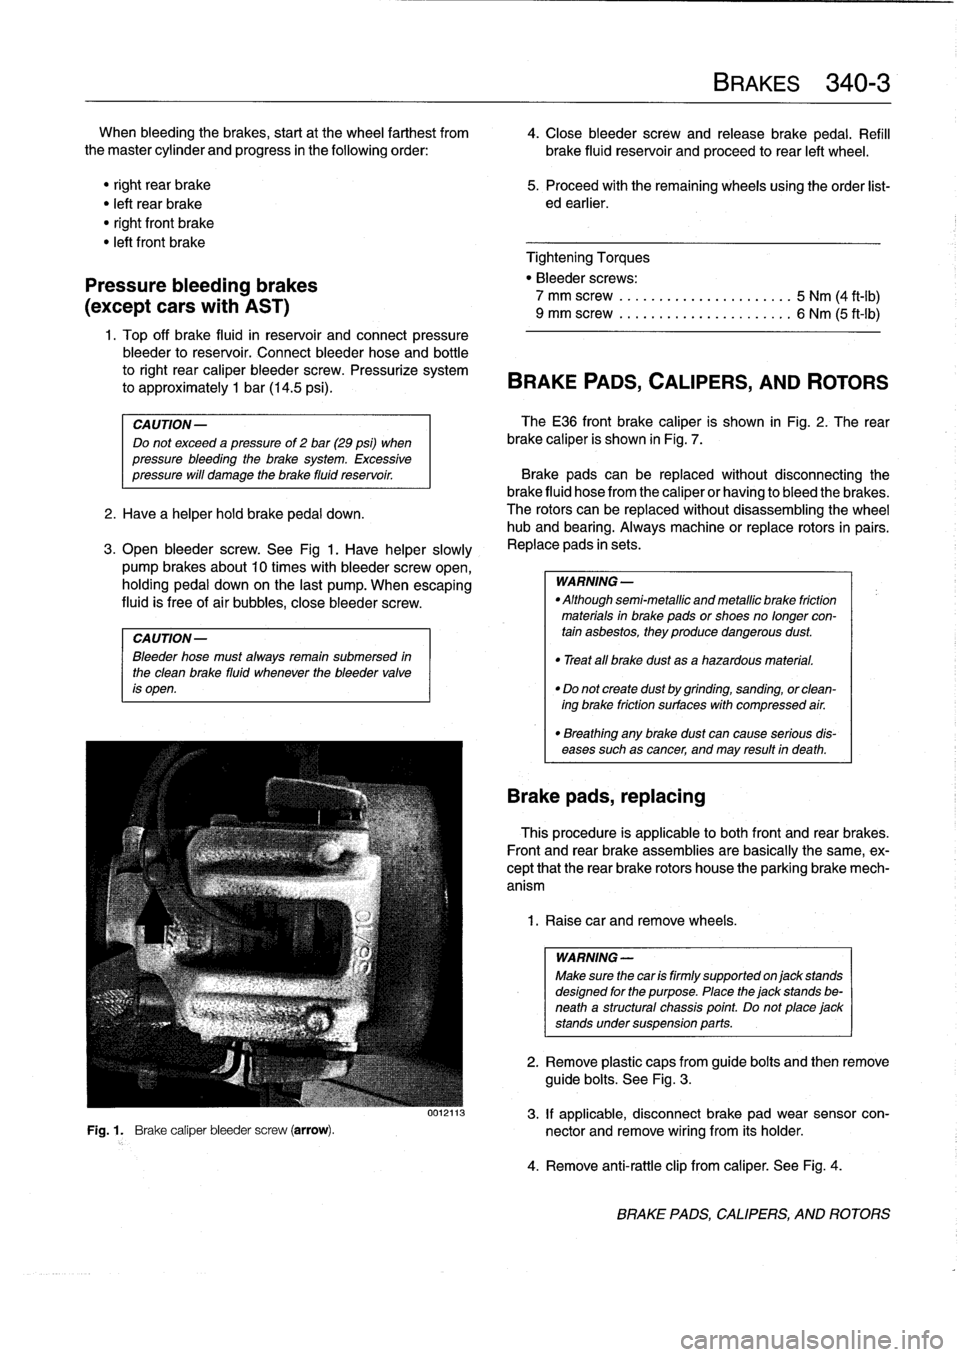 BMW 328i 1998 E36 Workshop Manual 
When
bleeding
the
brakes,
startat
the
wheel
farthest
from

	

4
.
Close
bleeder
screw
and
release
brake
pedal
.
Refill
the
master
cylinder
and
progress
in
the
following
order
:

	

brake
fluid
reserv